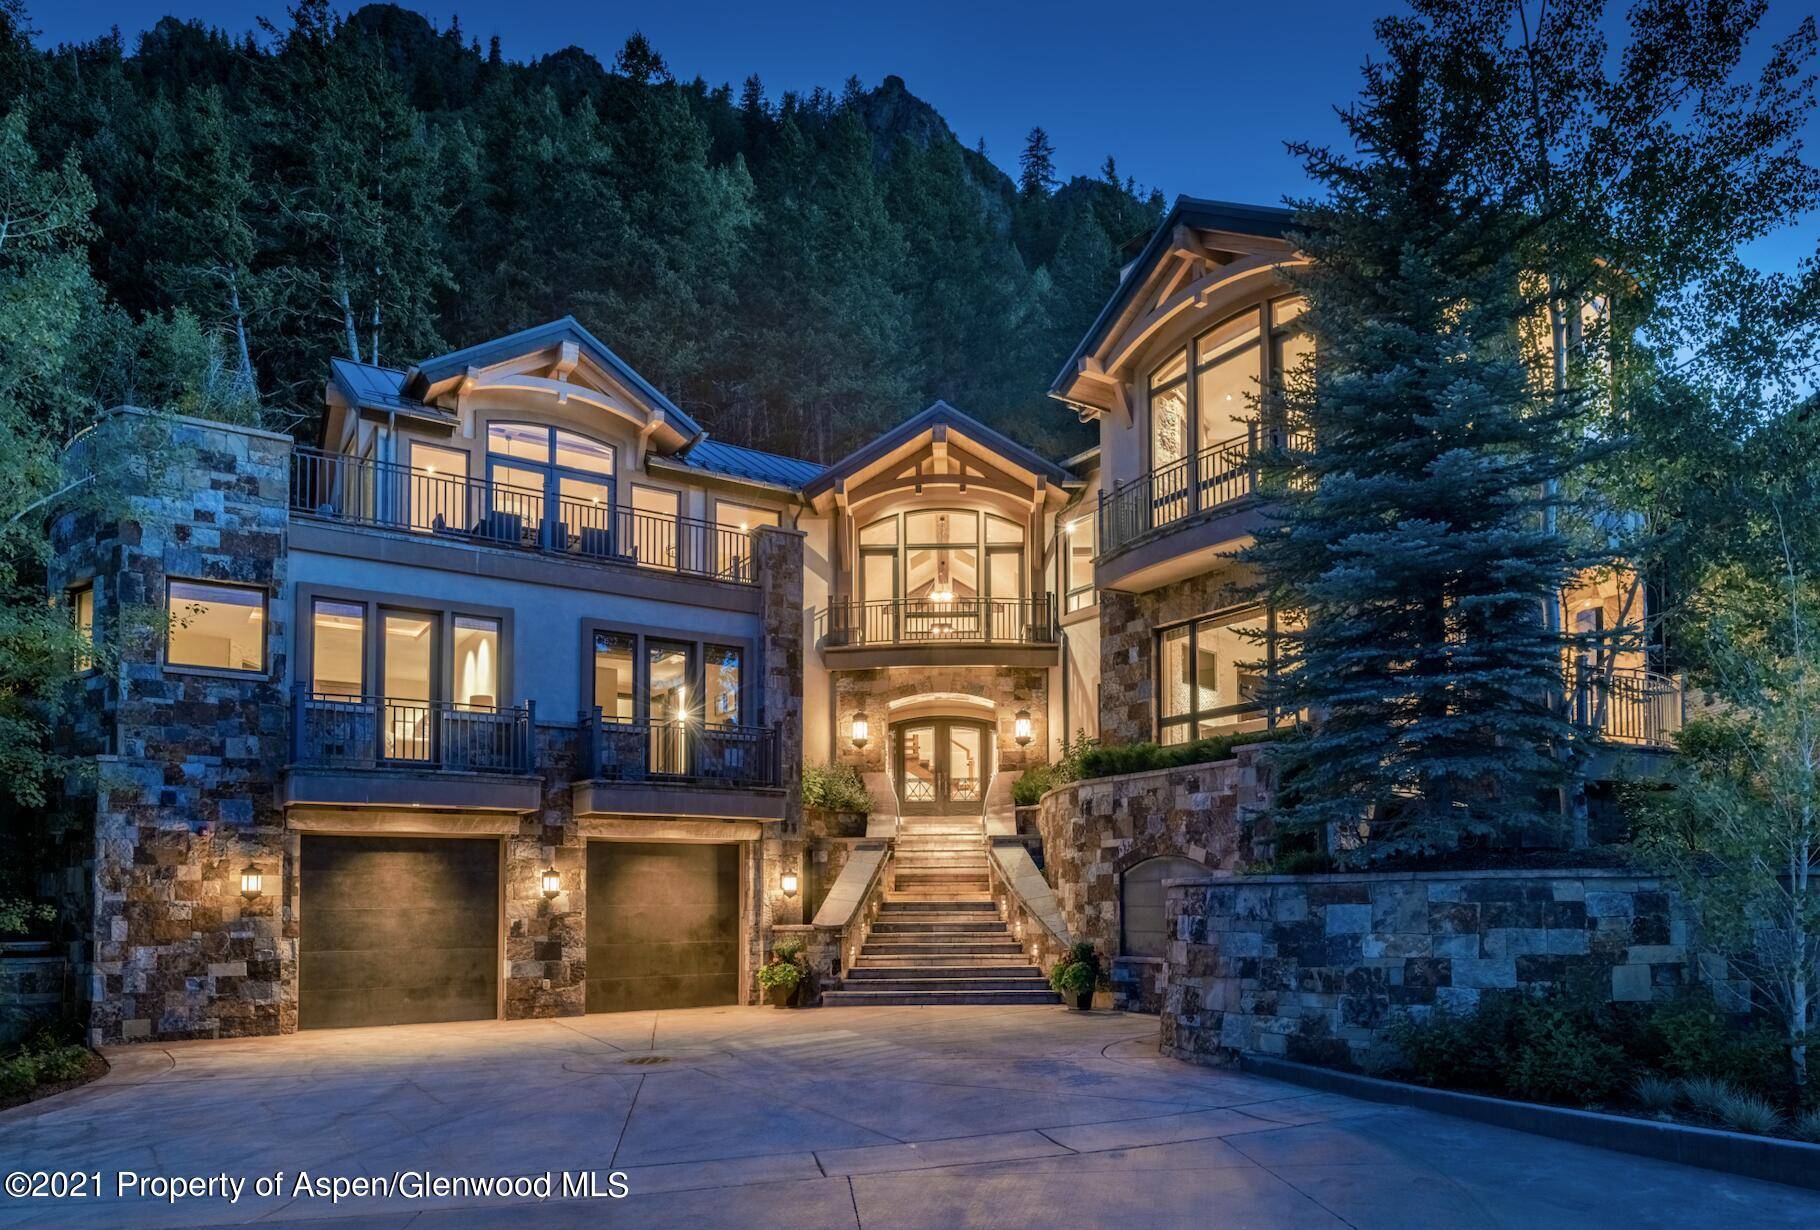 Nestled in a private gated 10 acre enclave on the base of Aspen Mountain this home offers sweeping views of Independence Pass, Red Mountain, the town of Aspen and Aspen ...